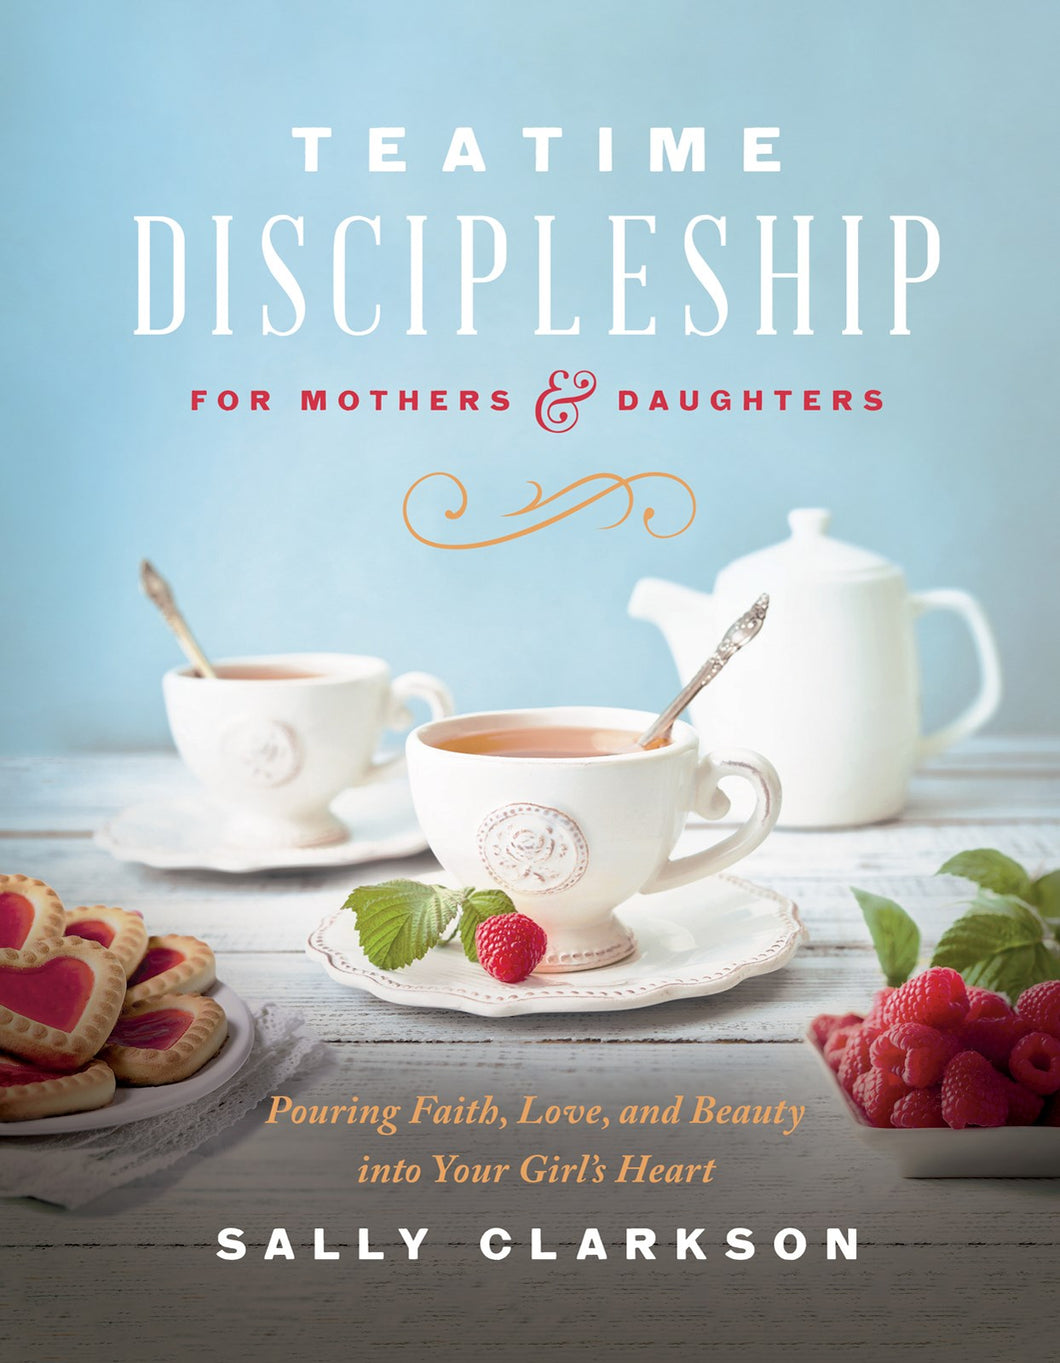 Teatime Discipleship For Mothers And Daughters